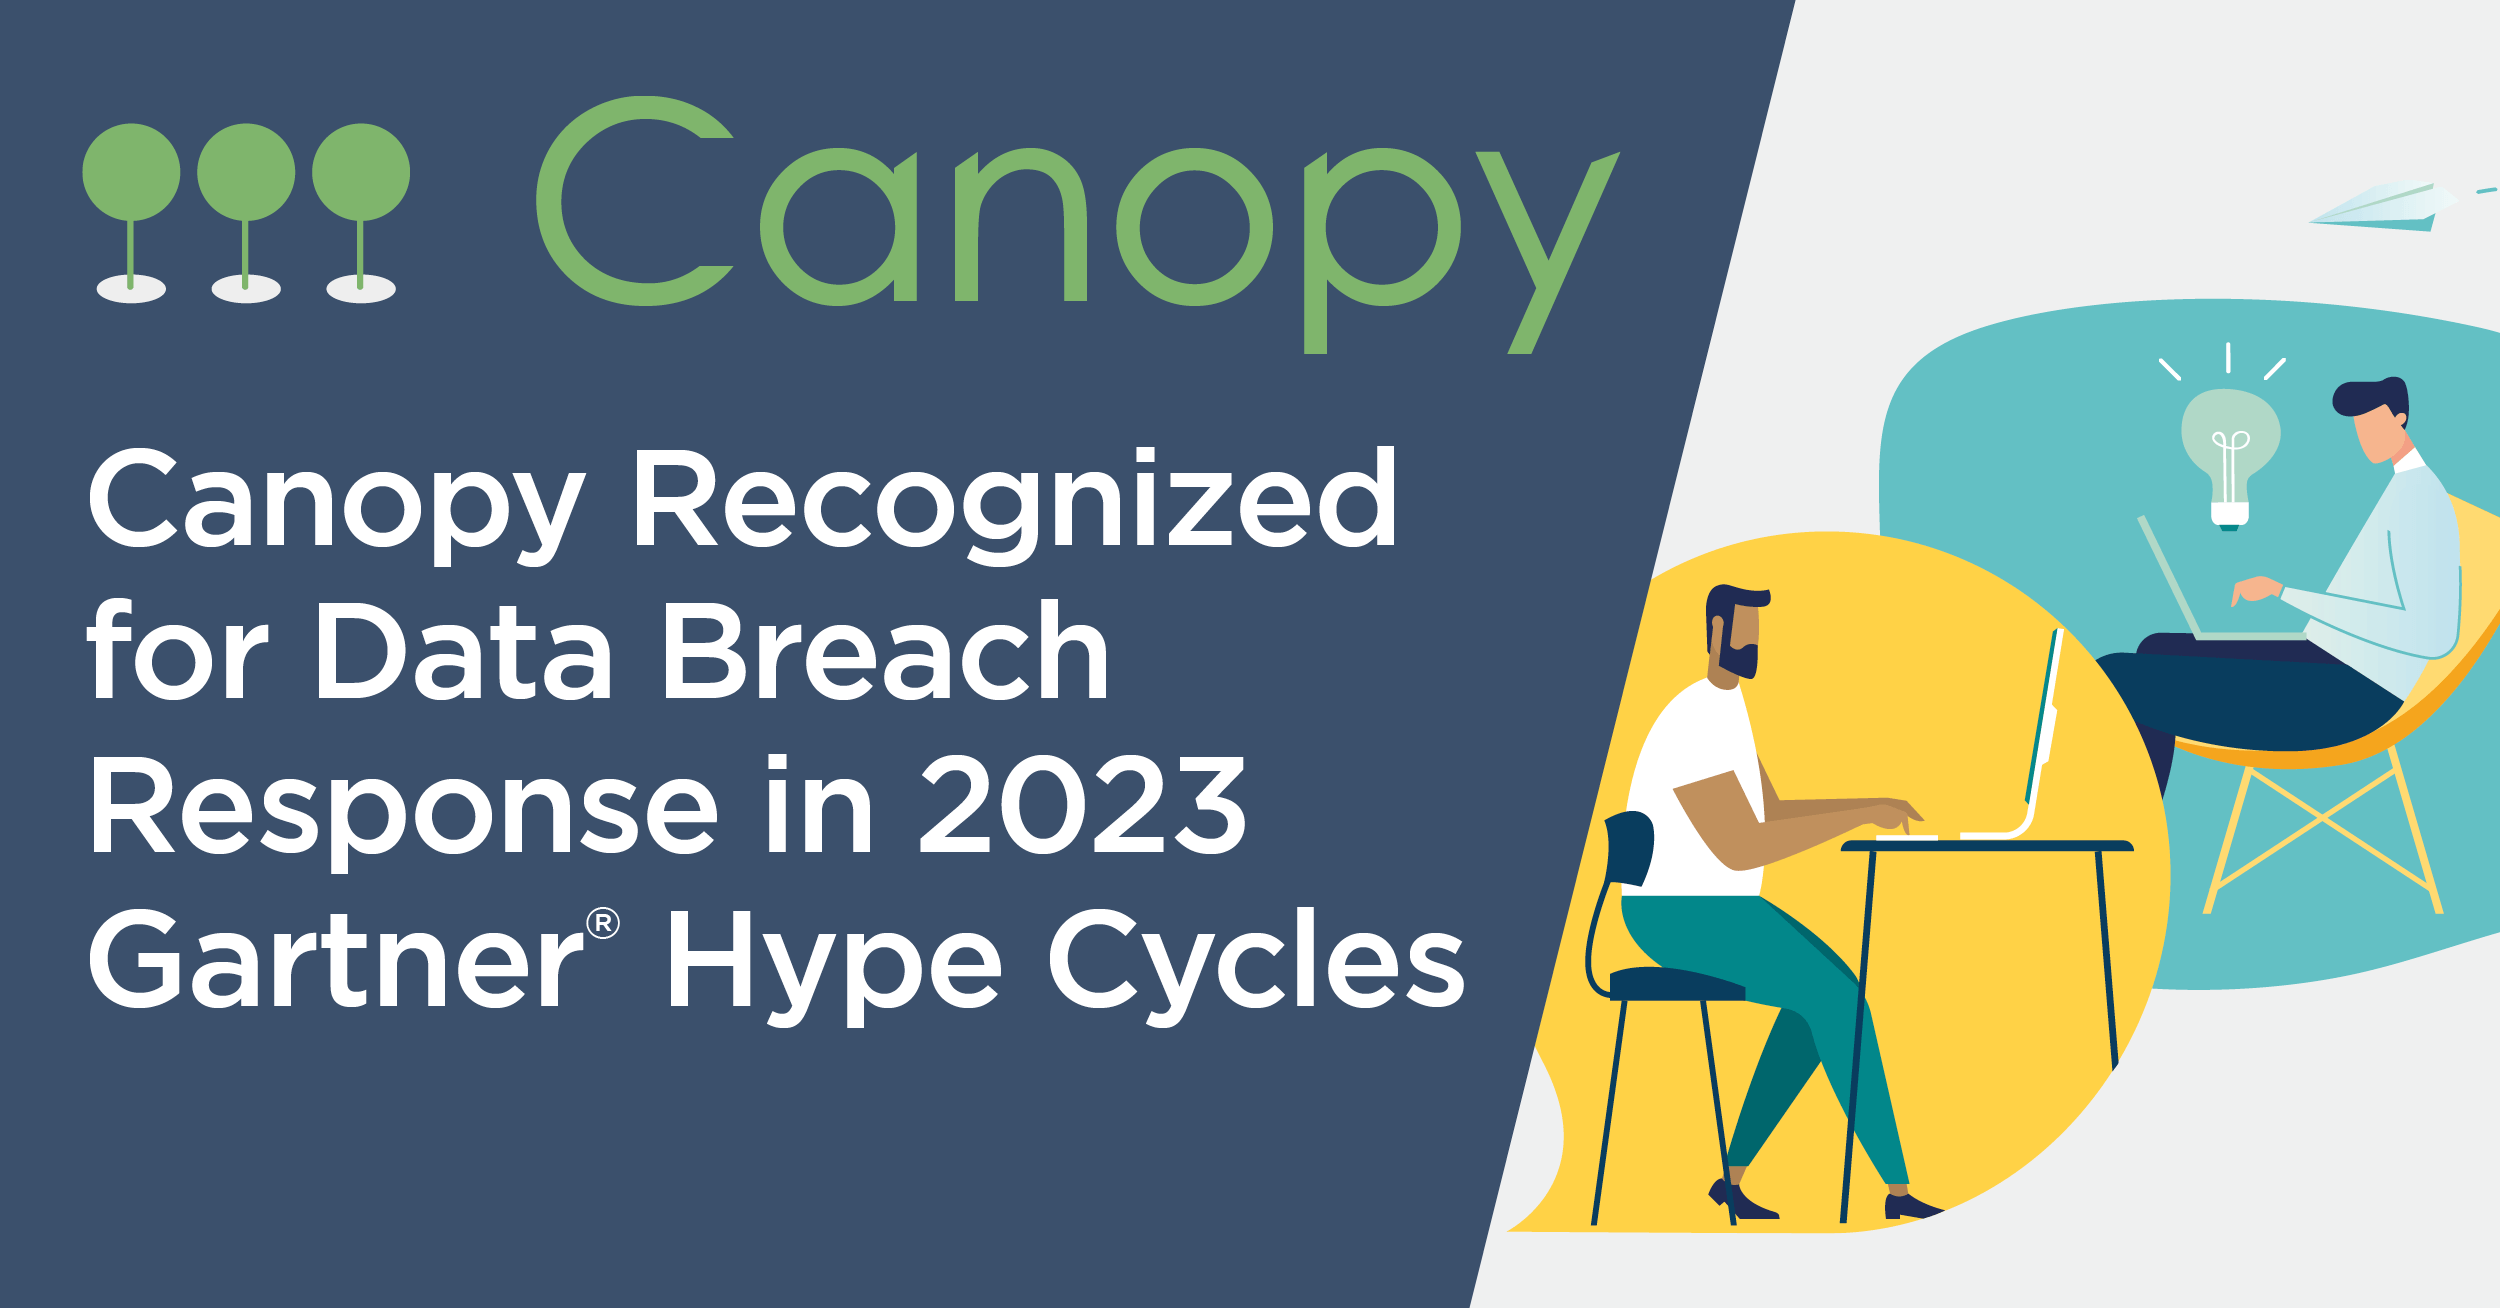 Canopy logo and title text - Canopy Recognized for Data Breach Response in 2023 Gartner Hype Cycles - with men in speech bubbles sharing recommendations and ideas